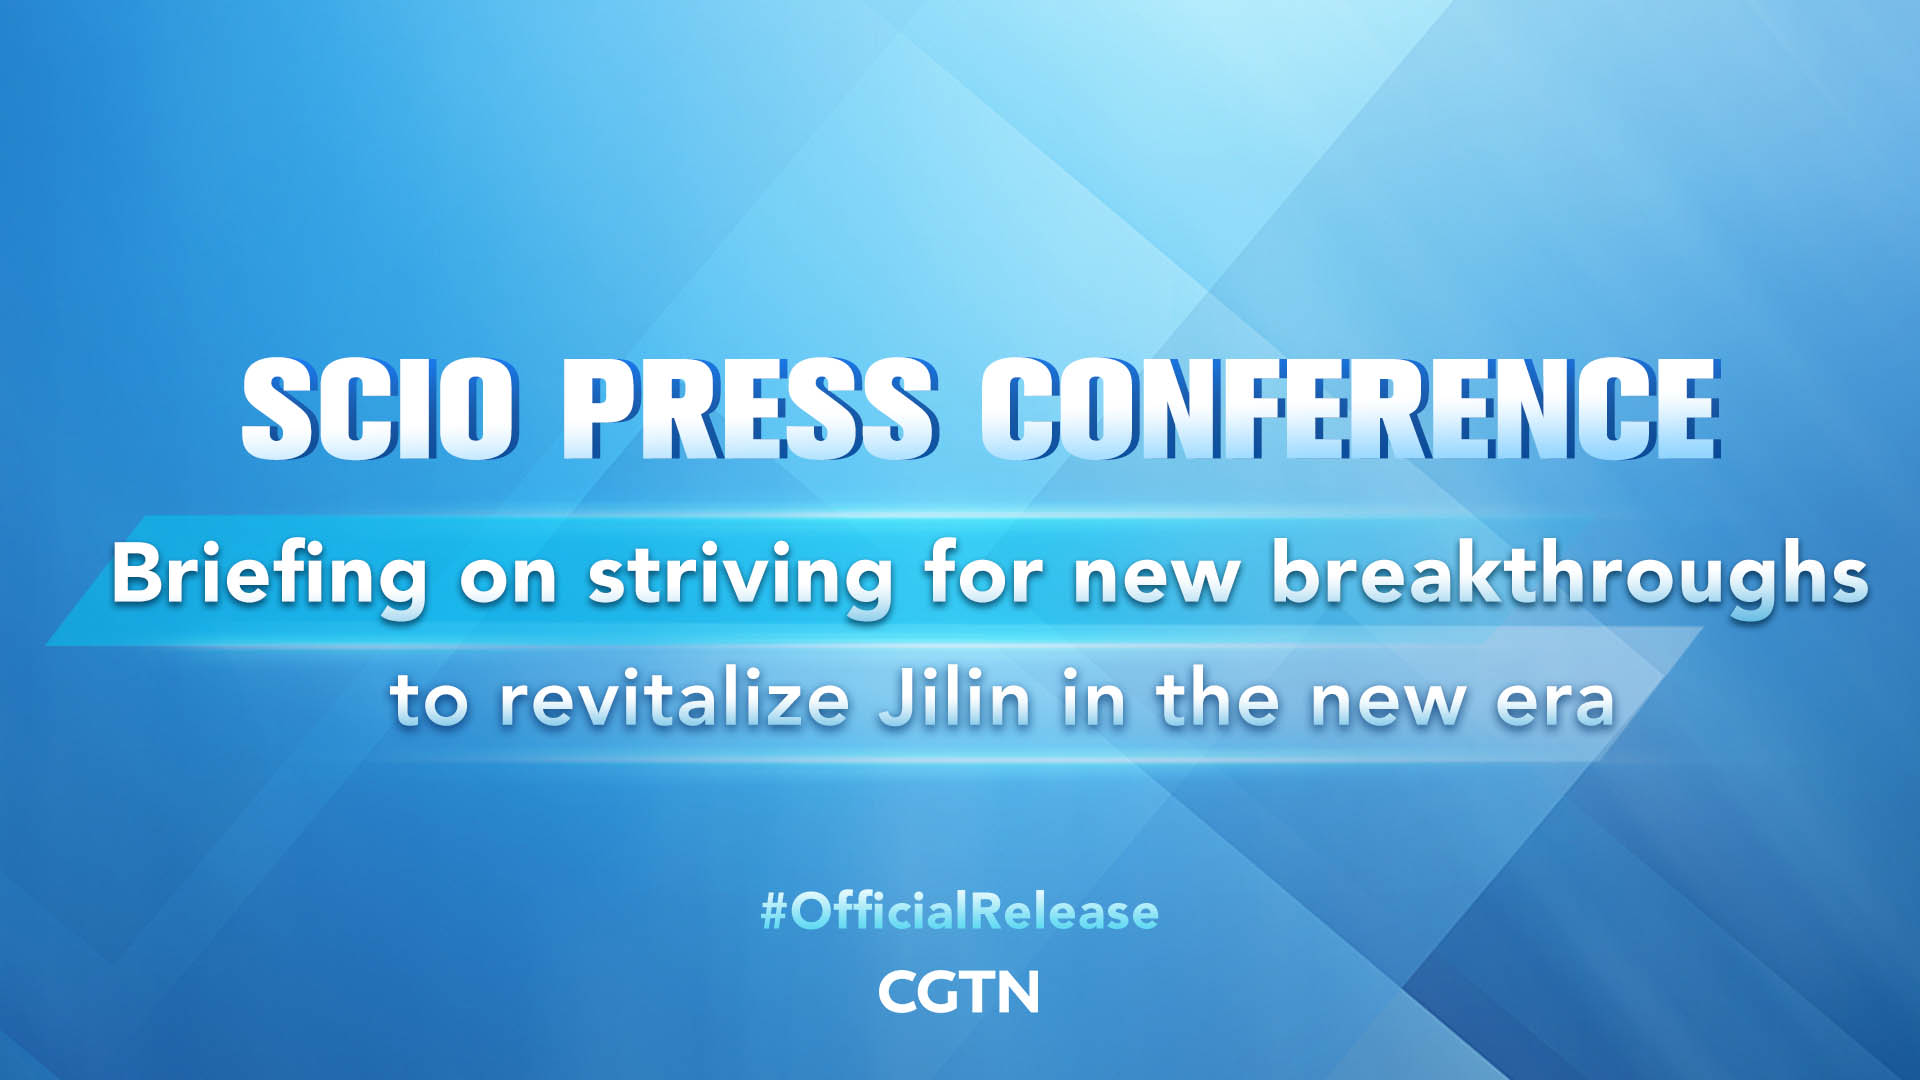 Live: SCIO briefs on striving for new breakthroughs to revitalize Jilin in the new era